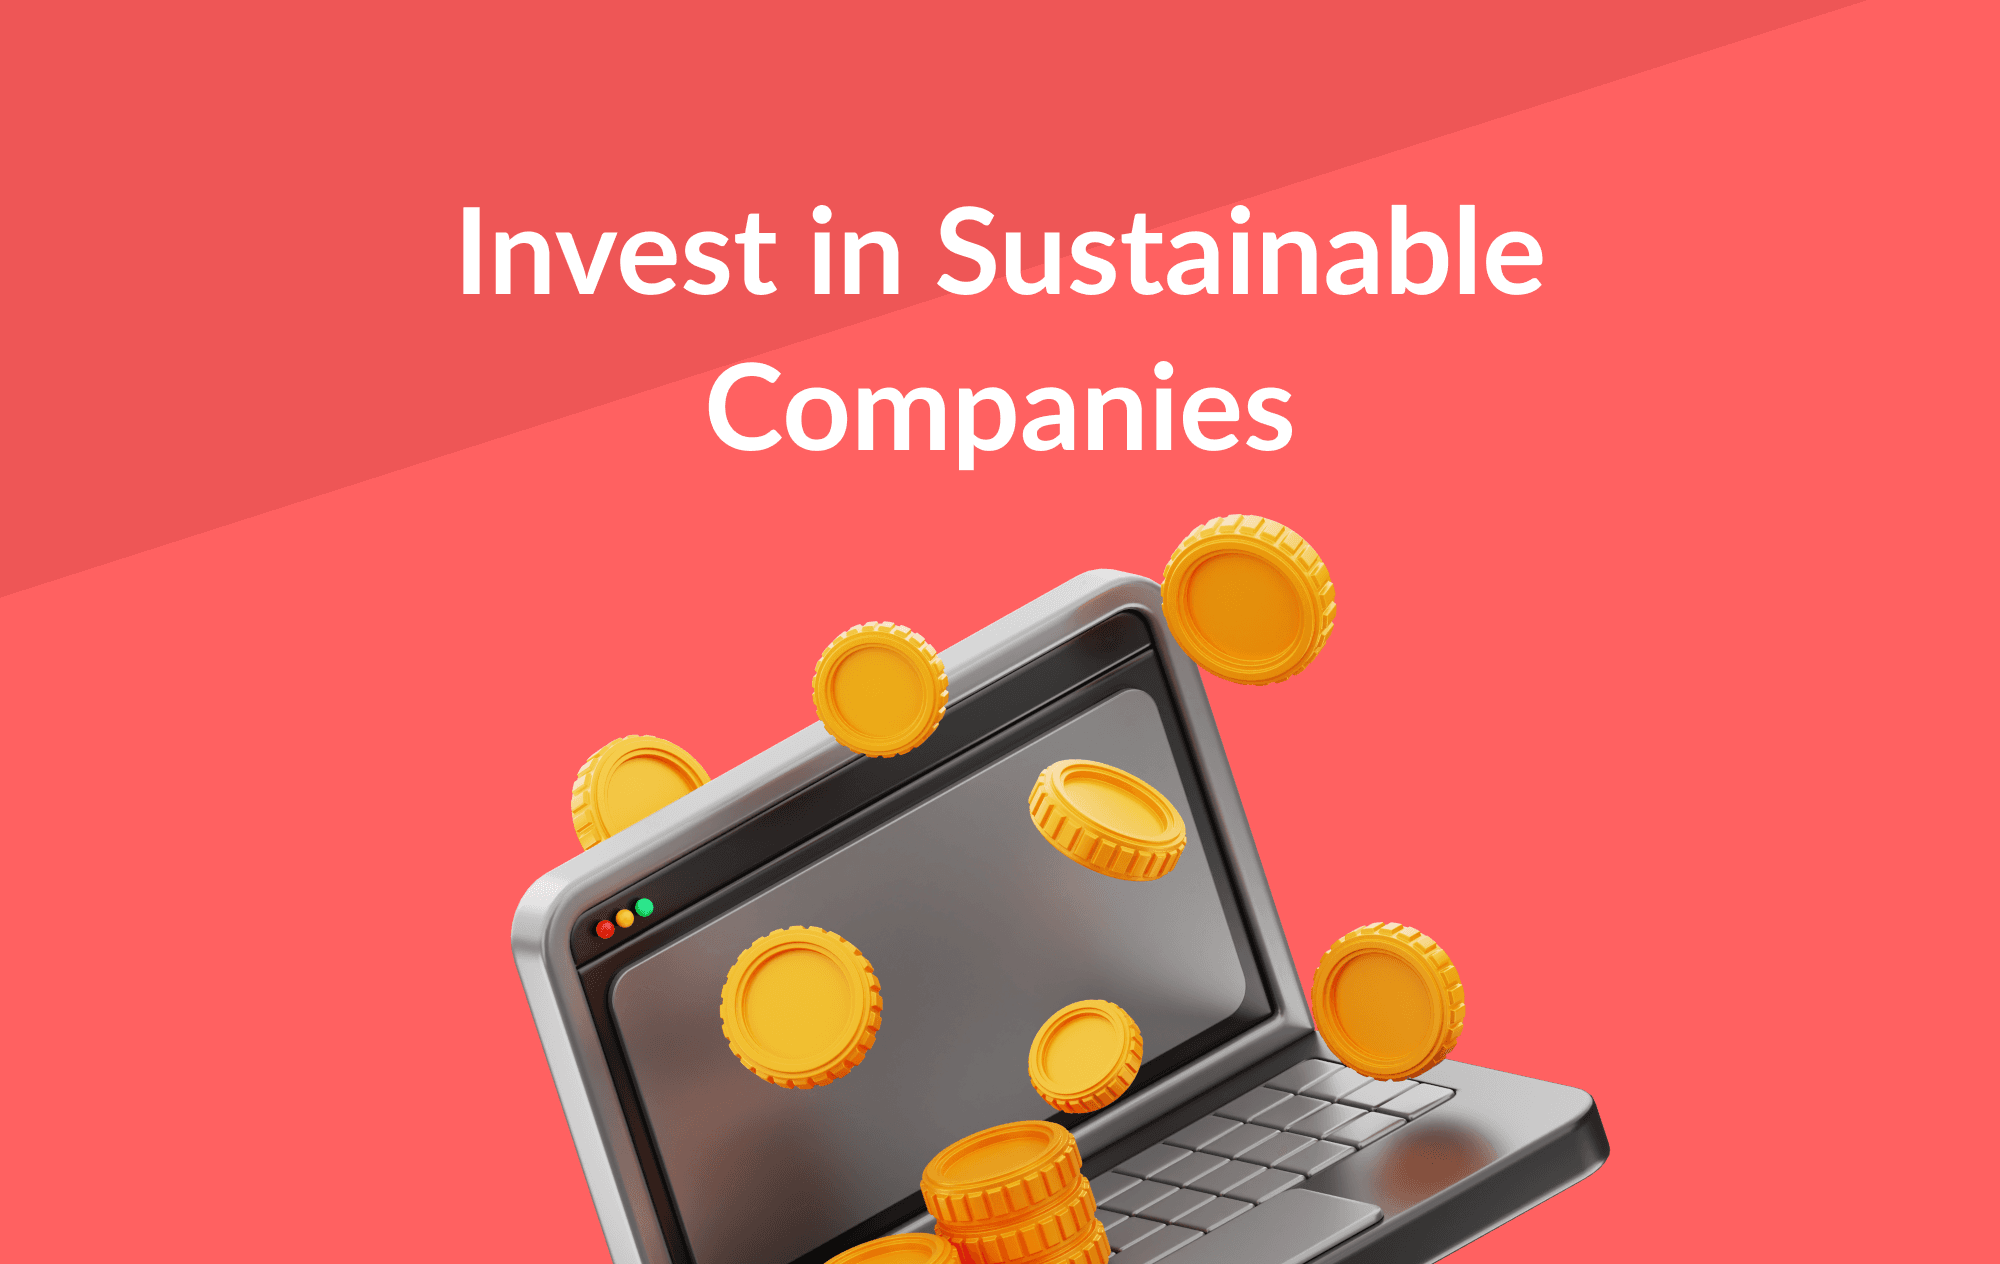 Green Investments: How to Invest in Sustainable Companies?